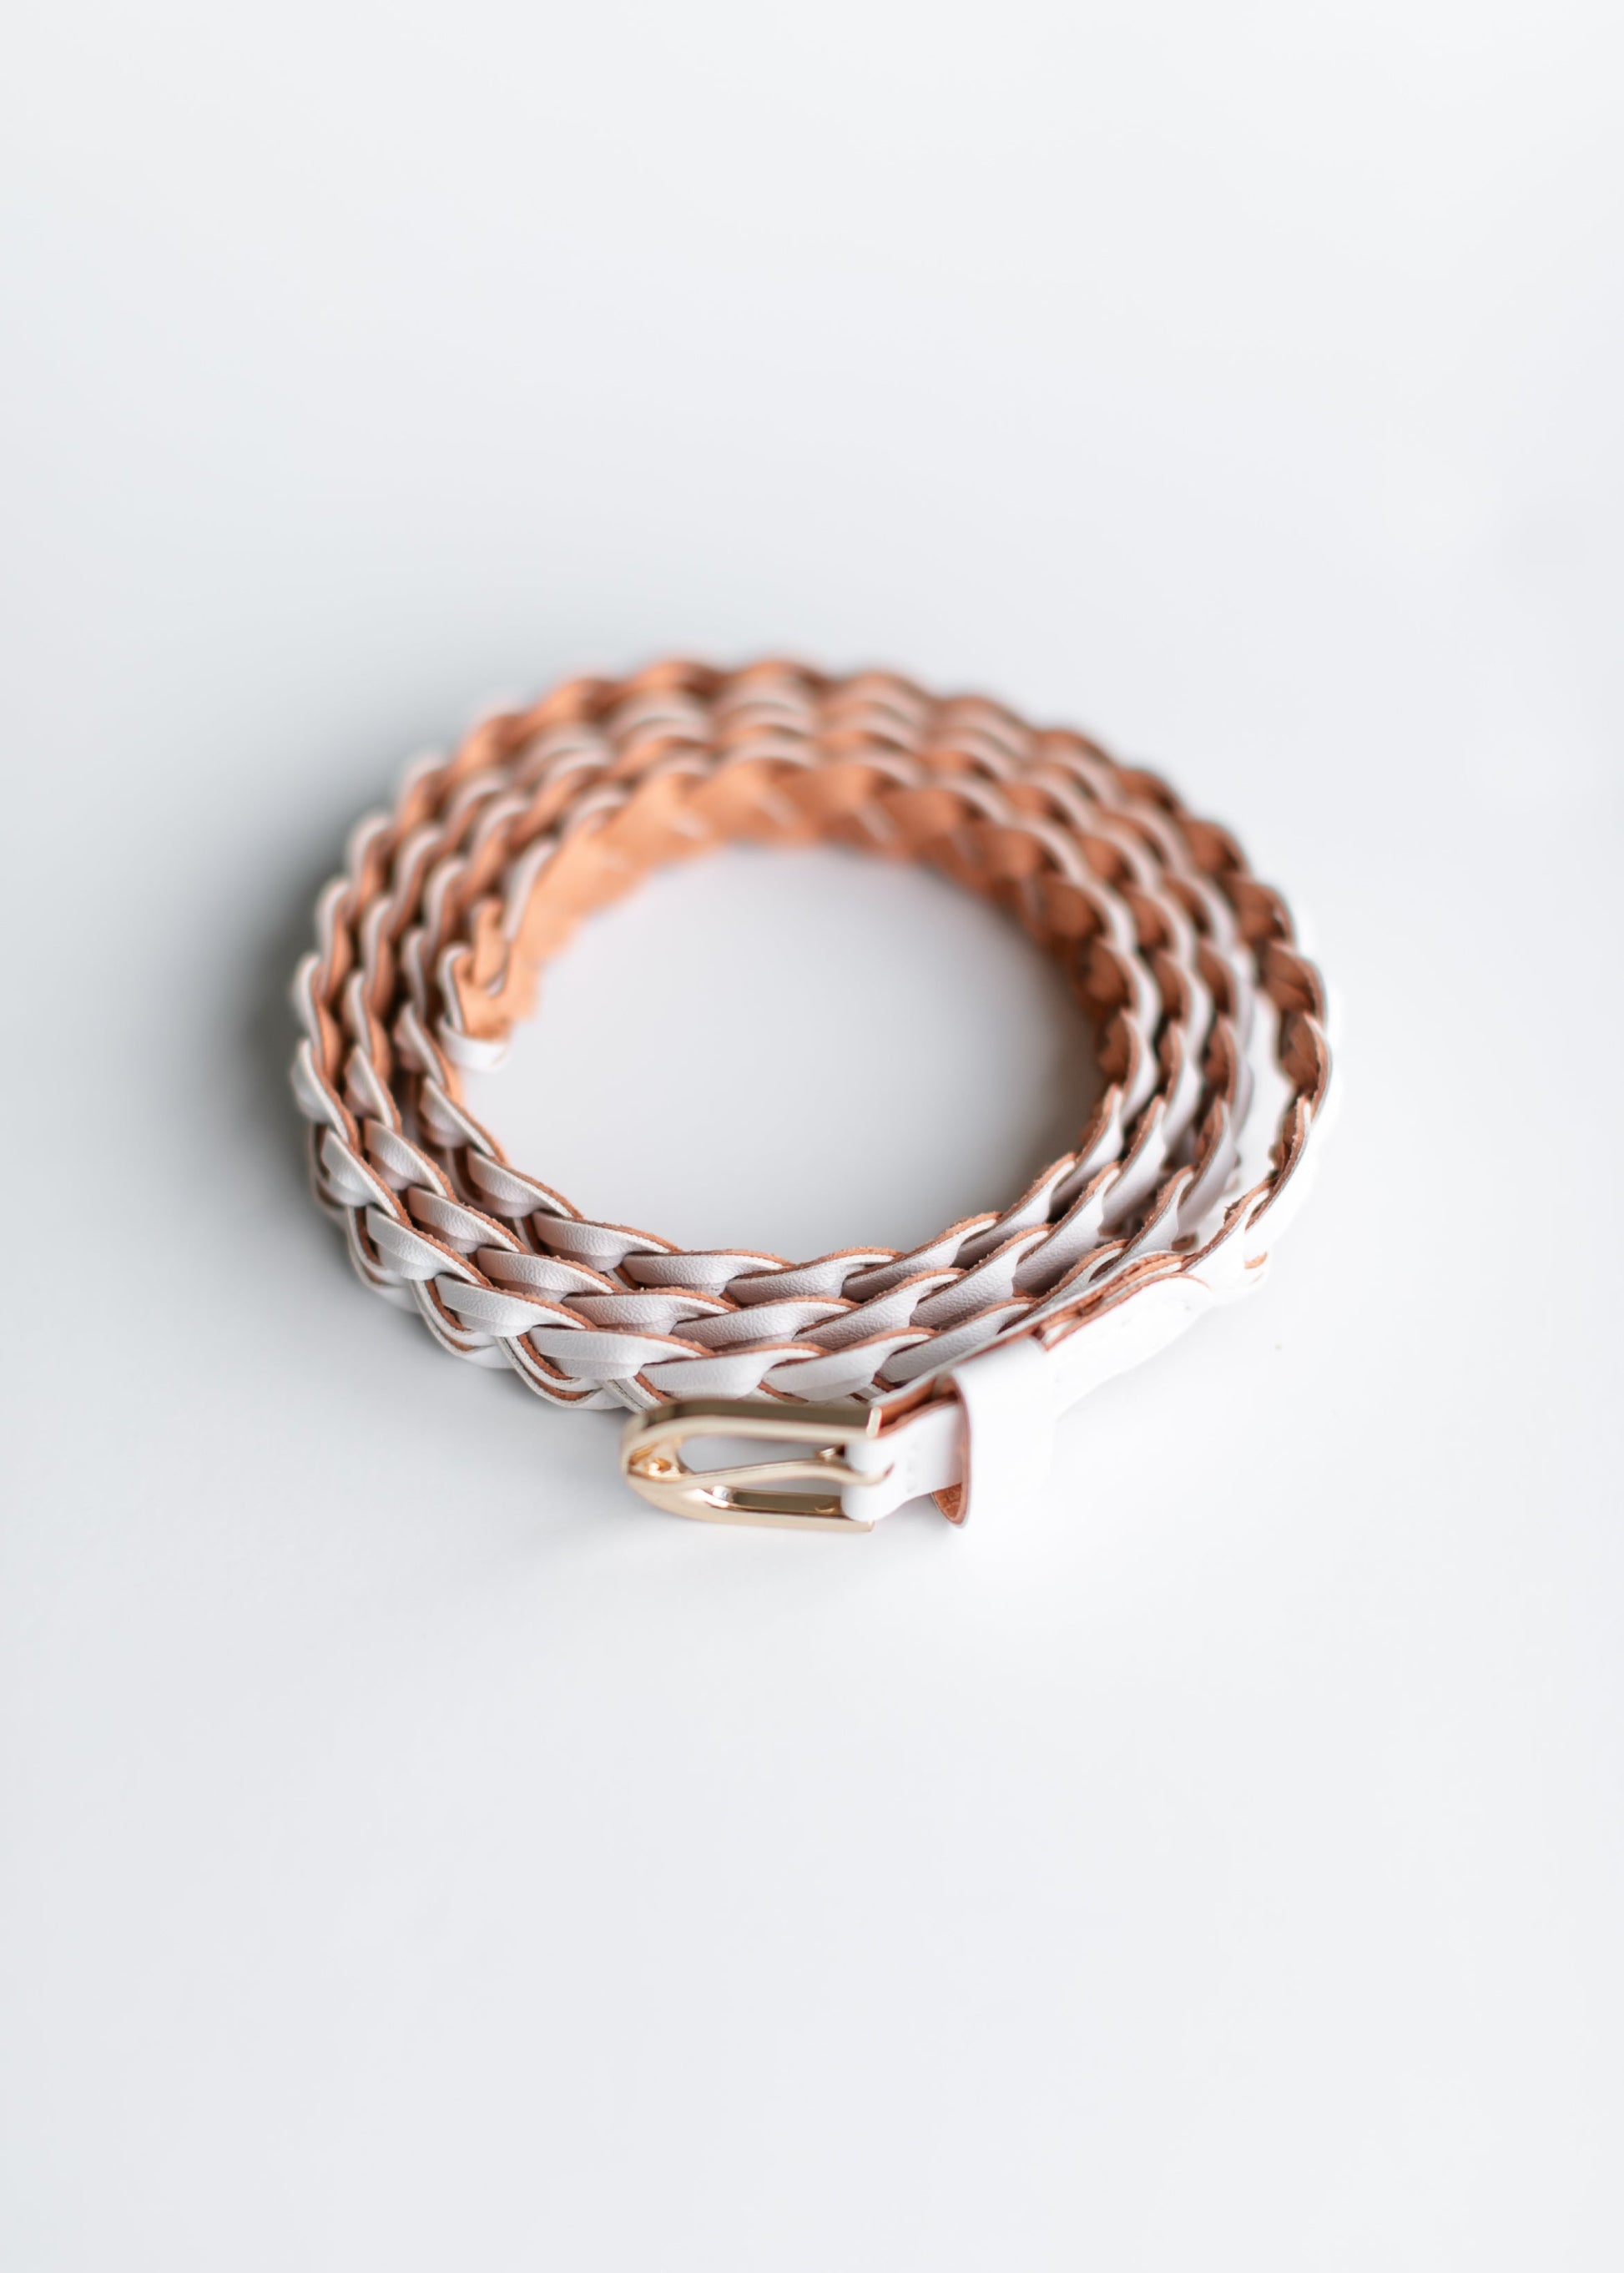 Faux Leather Skinny Braided Belt Accessories